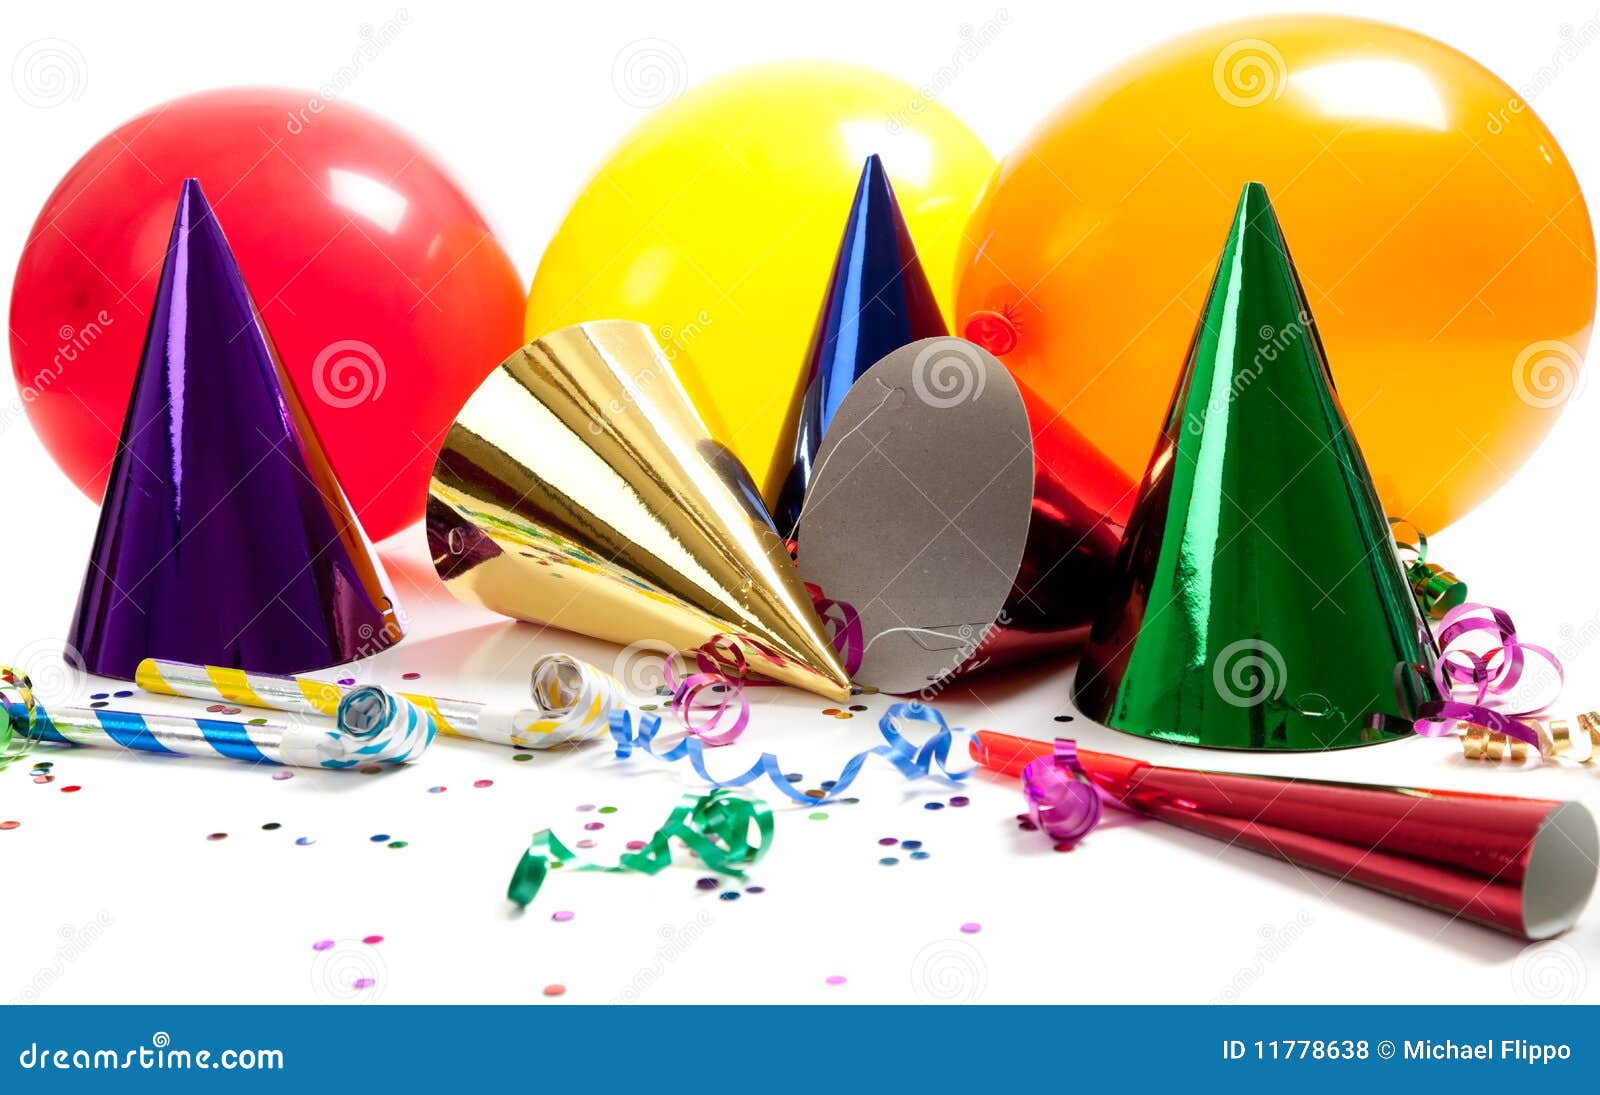 Party Hats On A White Background Royalty Free Stock Photos - Image